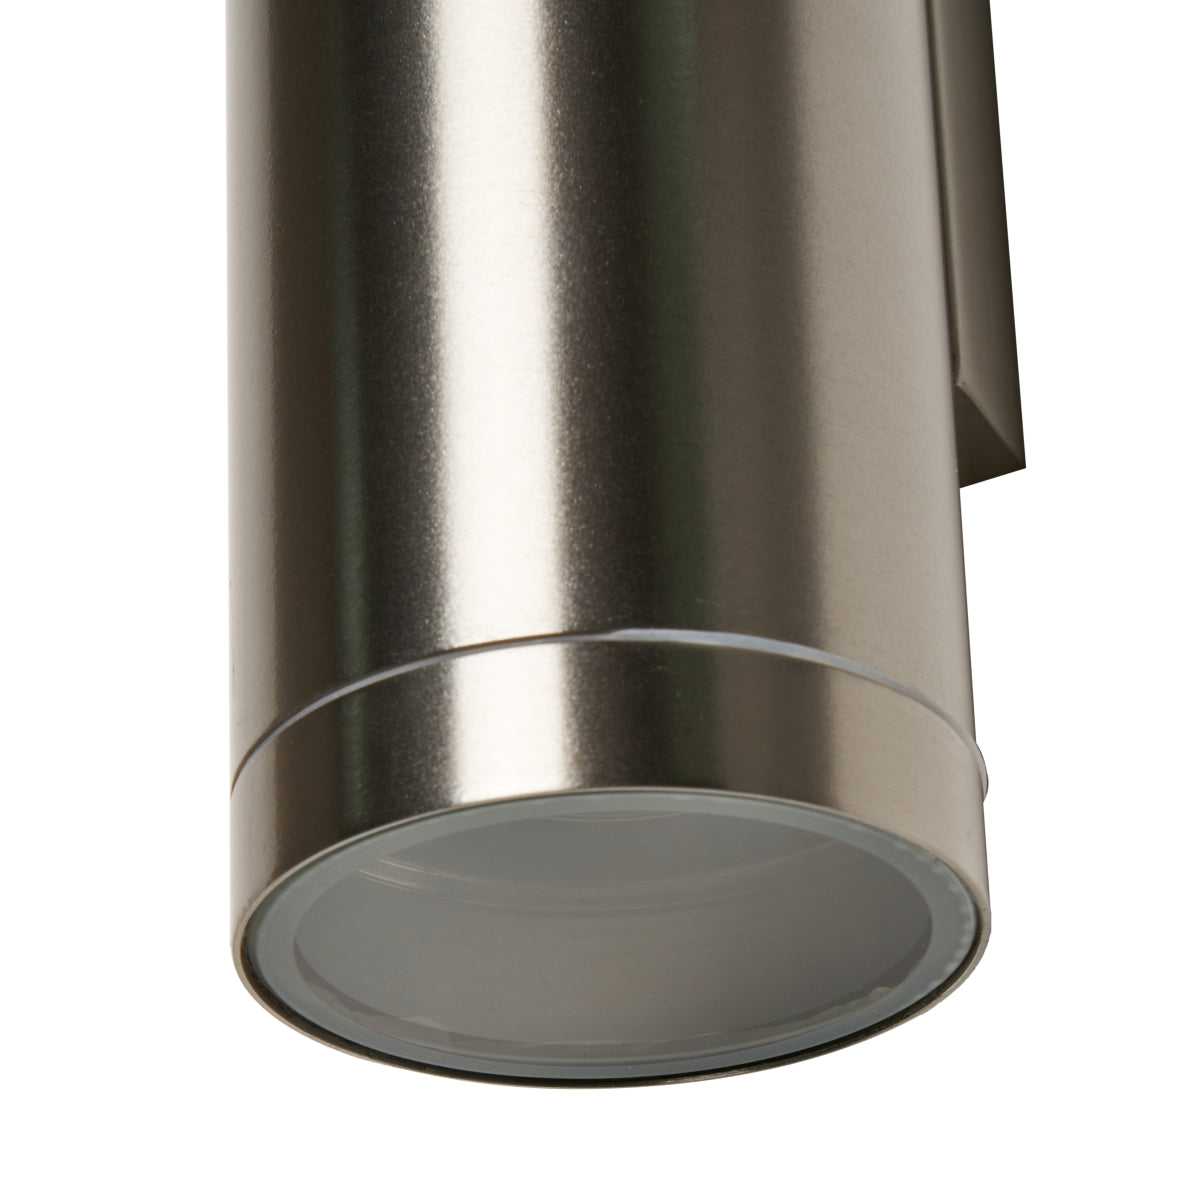 Our Lucas stainless steel extra long outdoor wall mounted up and down cylinder outdoor light would look perfect in a modern or more traditional home design. Outside wall lights can provide atmospheric light in your garden, at the front door or on the terrace as well as a great security solution. It is designed for durability and longevity with its robust material producing a fully weatherproof and water resistant light fitting.